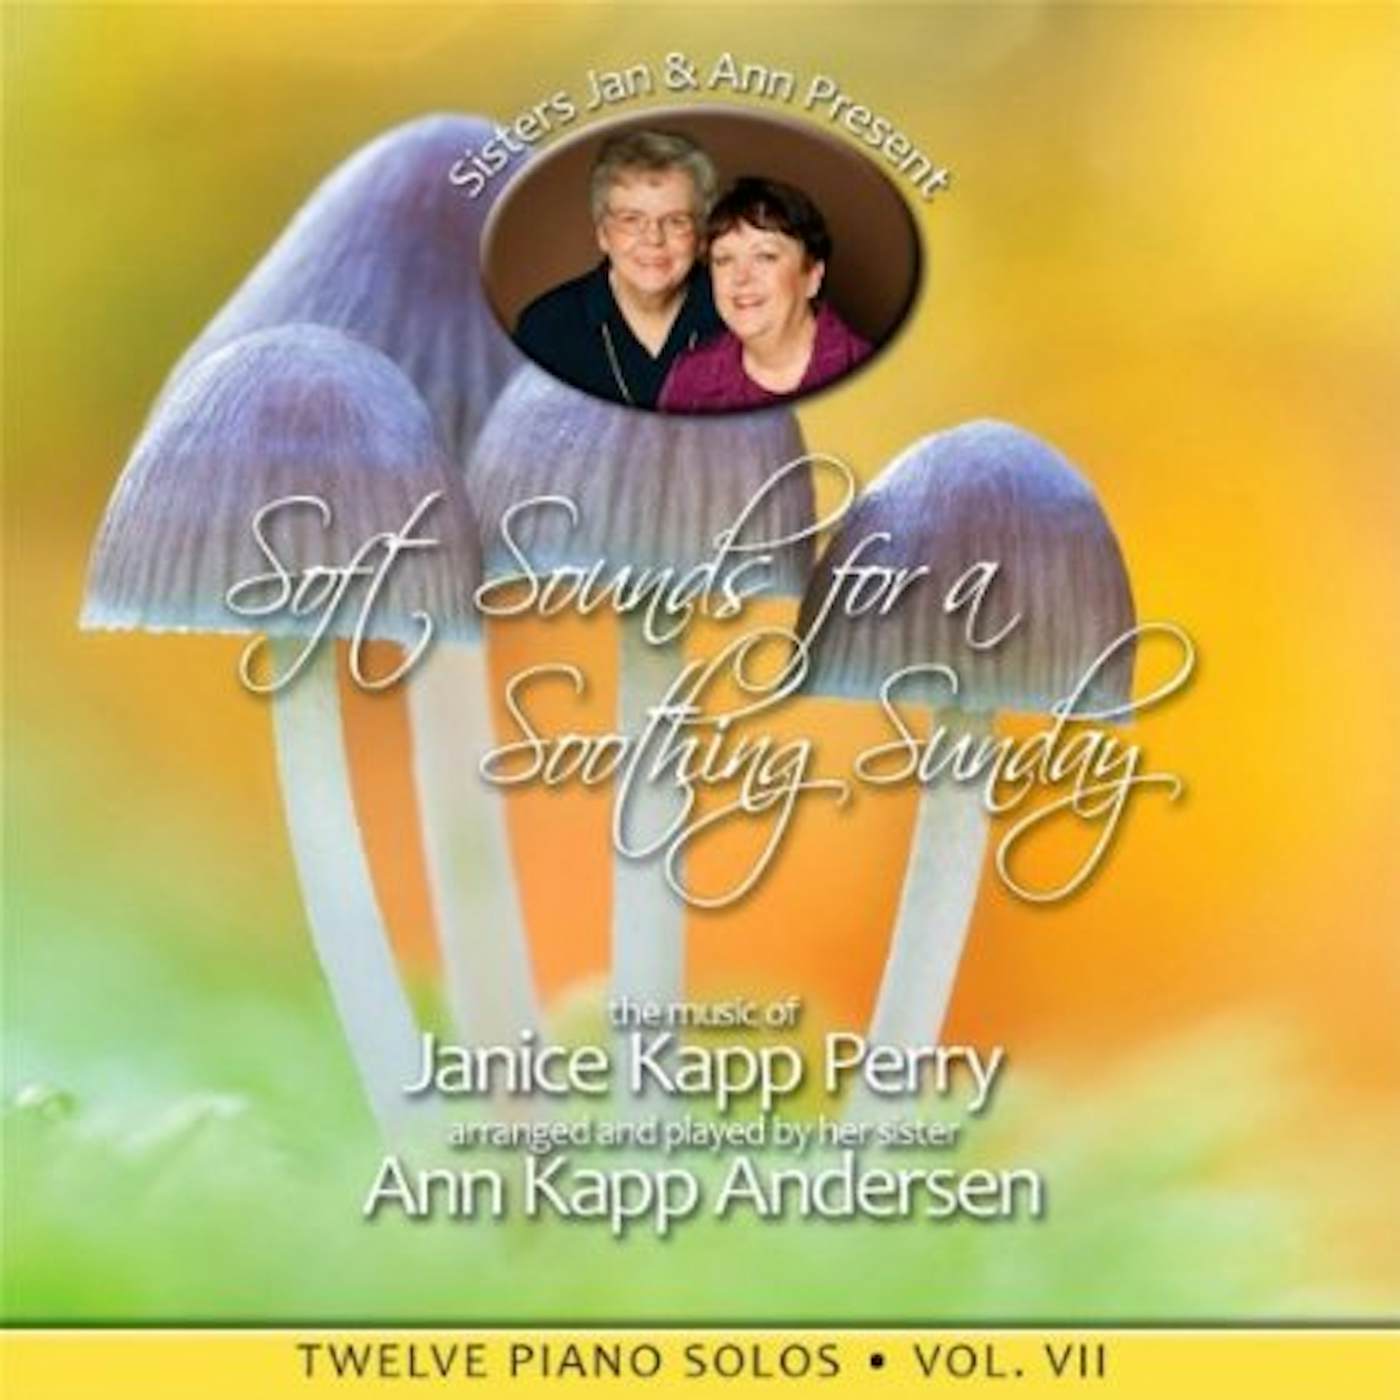 Janice Kapp Perry SOFT SOUNDS FOR A SOOTHING SUNDAY 7 CD